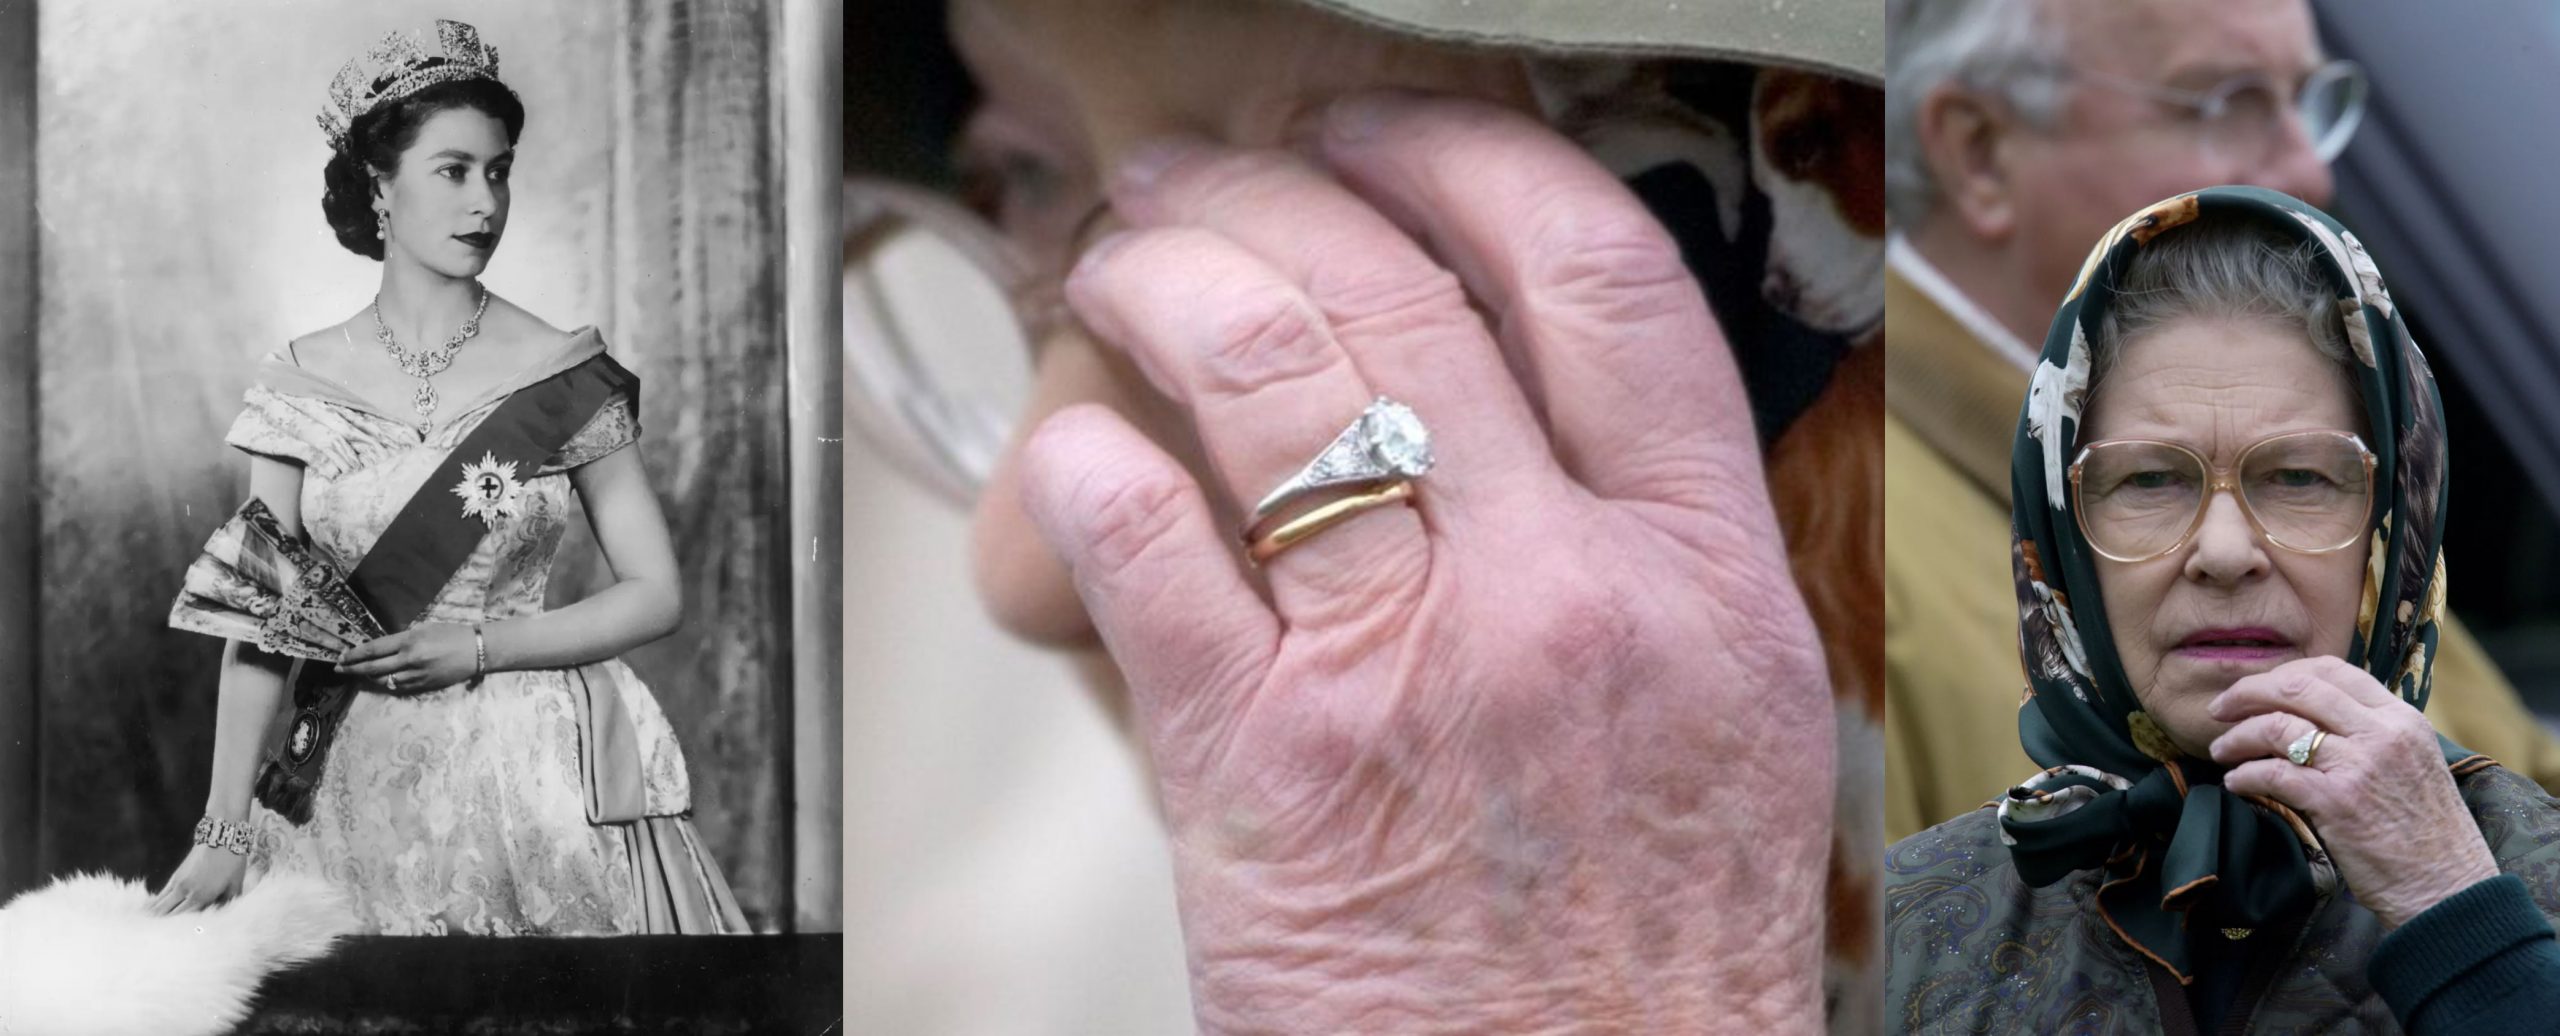 The Queen's engagement ring